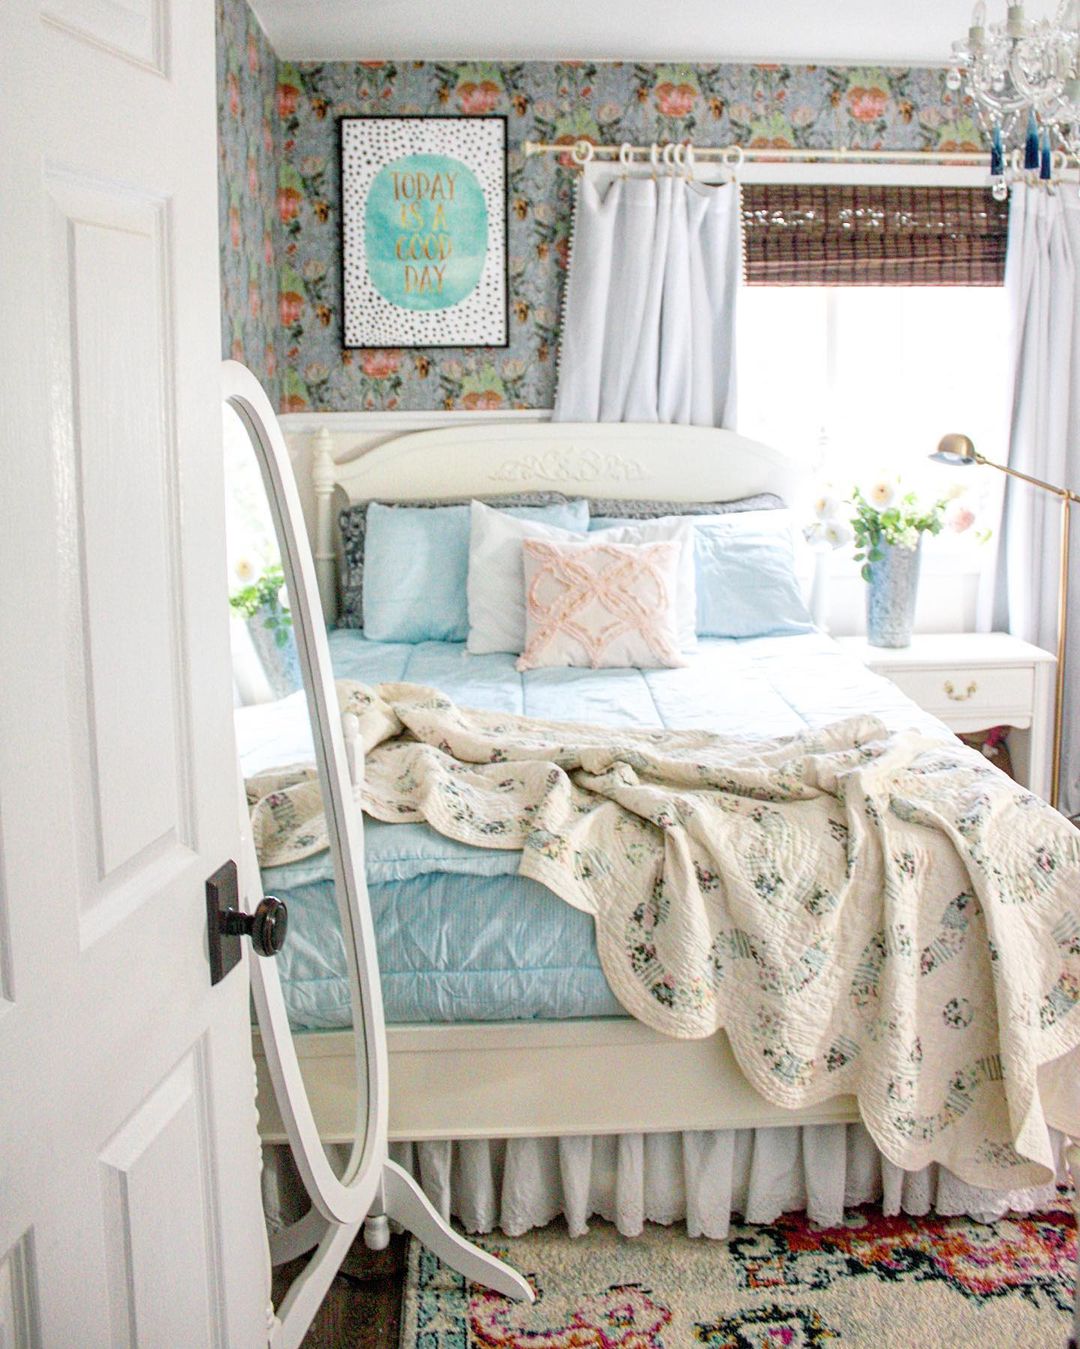 Farmhouse Bedroom with Blue Bedspread and Old Quilt on Top. Photo by Instagram user @brightyellowdoor